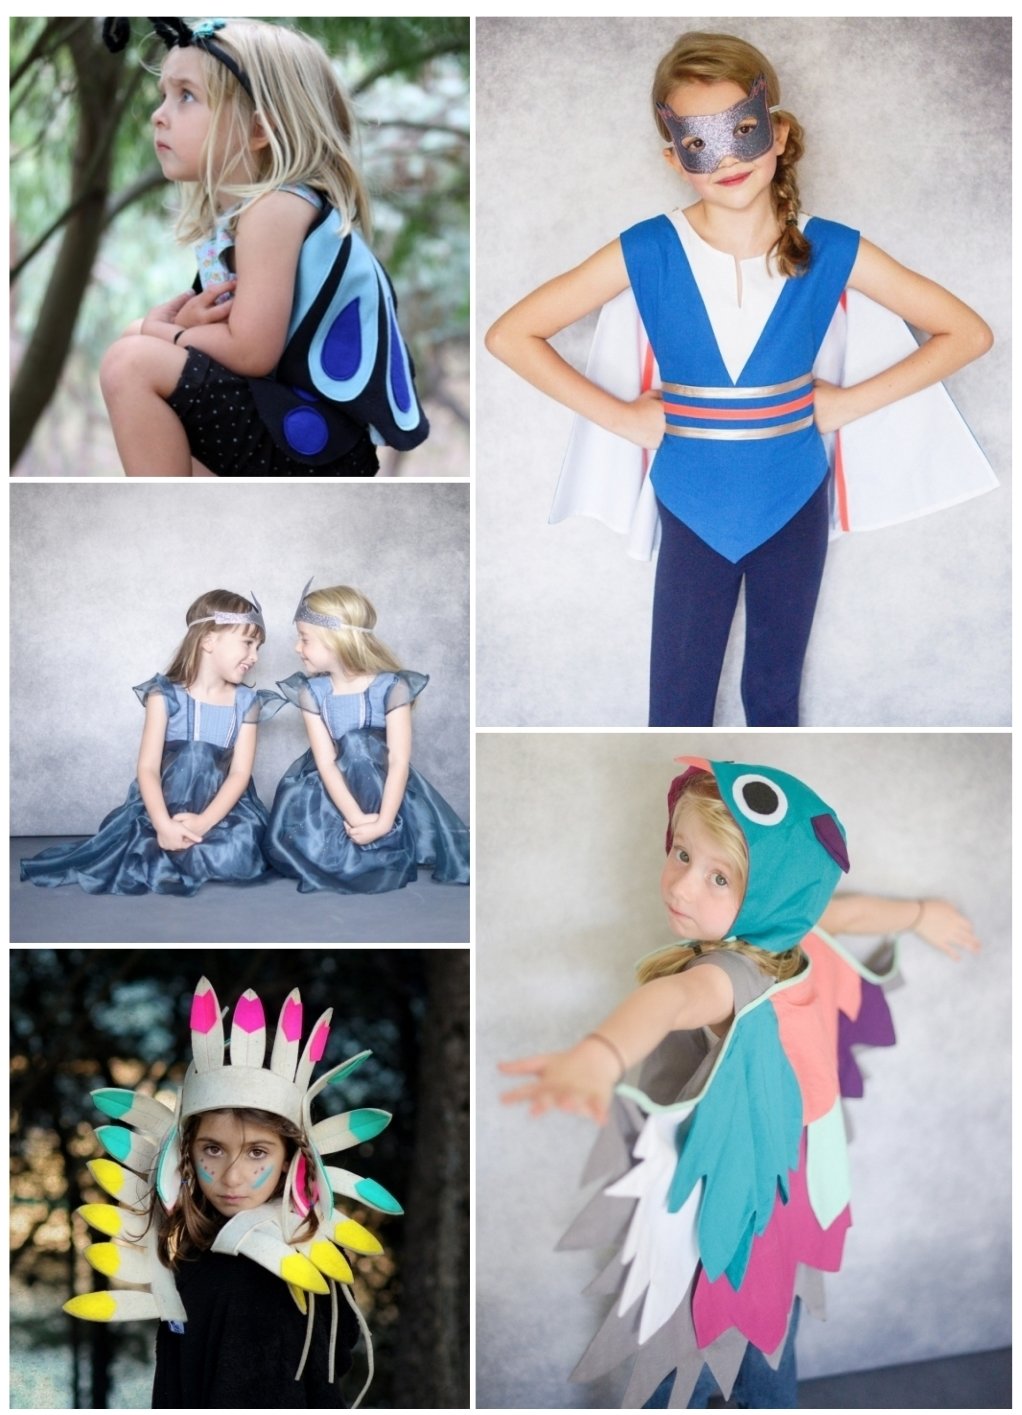 The best costumes for kids